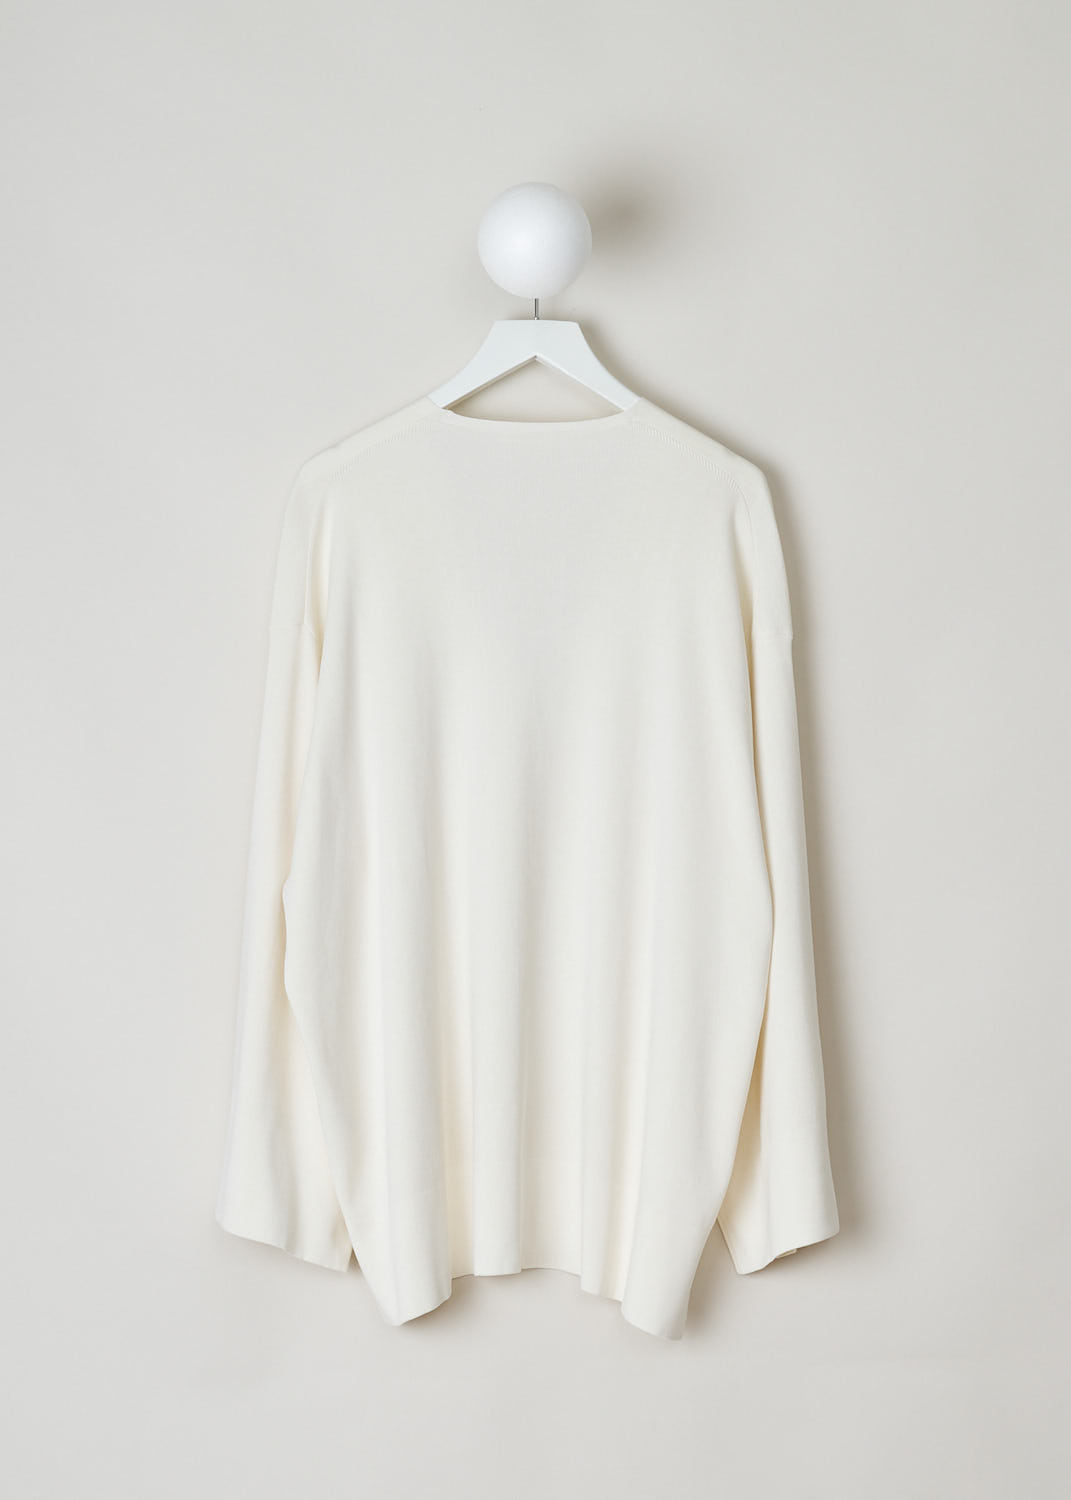 THE ROW, OFF-WHITE SWEATER, LESLI_TOP_3856Y252_IVORY, White, Back, This silk-blend top in off-white has a deep, rounded off V-neckline and slightly flared sleeves. The top has a broad hemline with small slits. The top has a wider silhouette.
